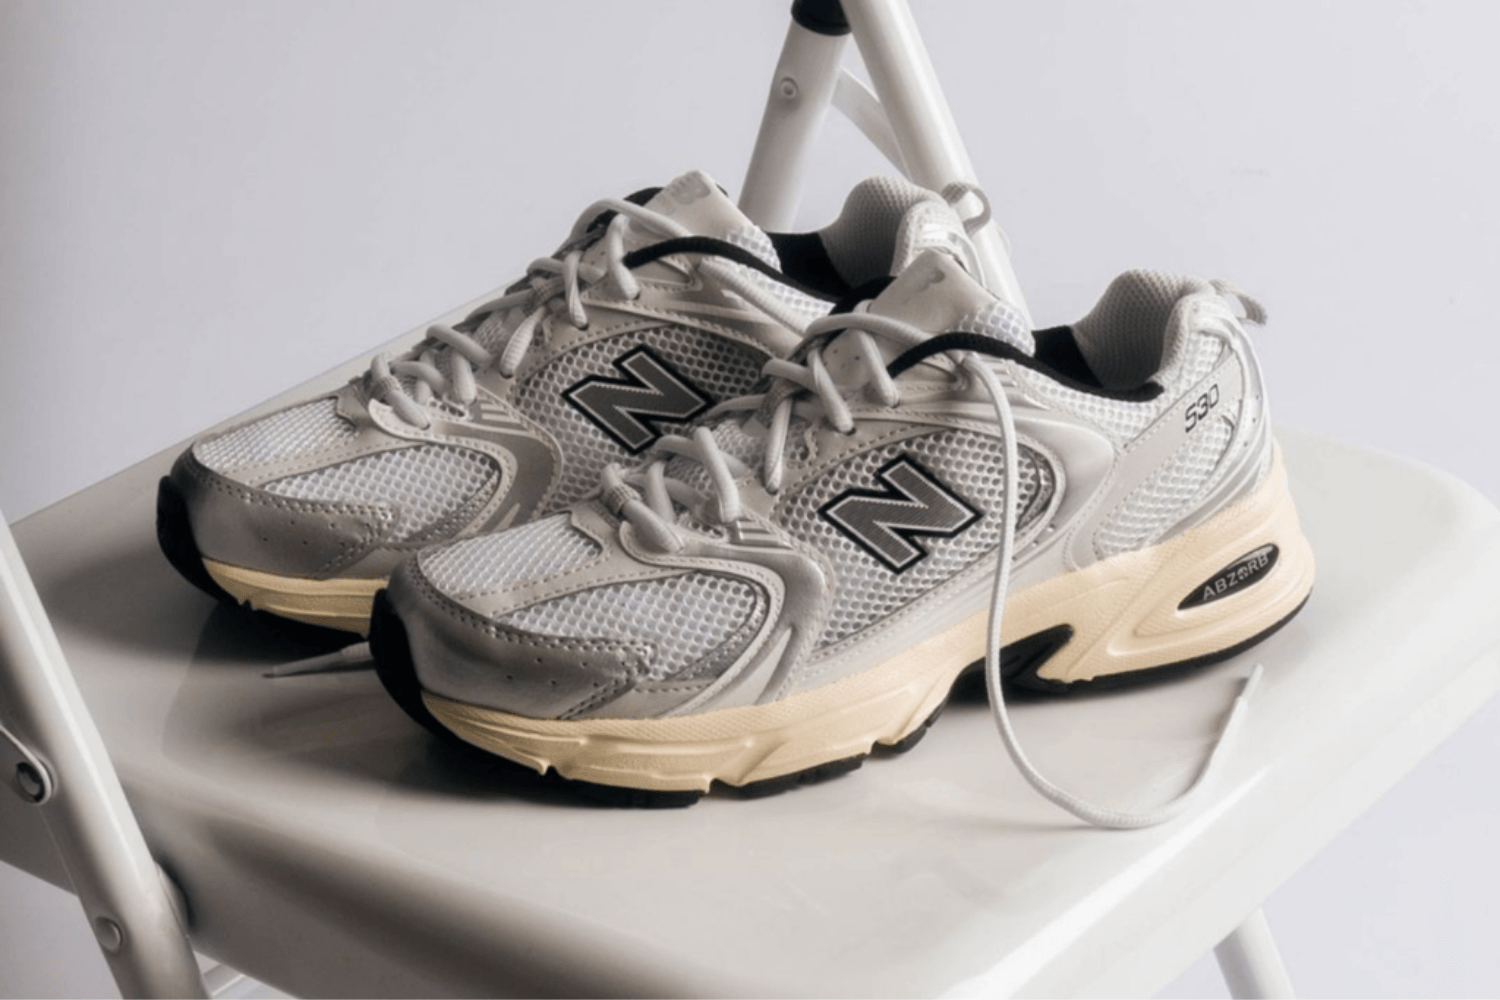 Shop New Balance styles at AFEW and get 15% off